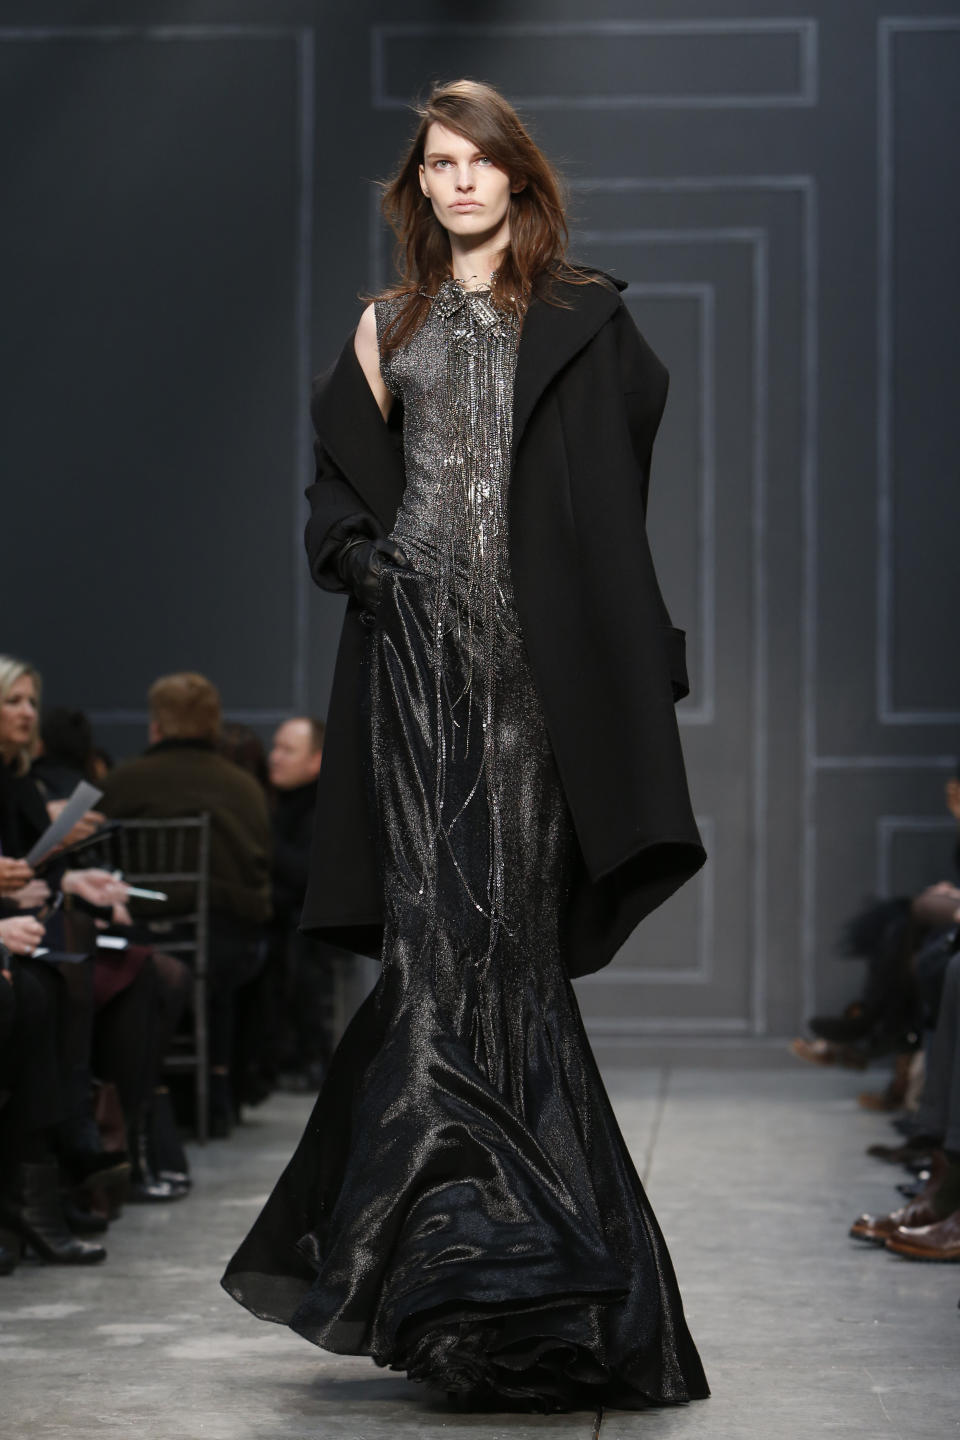 The Vera Wang Fall 2014 collection is modeled during Fashion Week in New York, Tuesday, Feb. 11, 2014. (AP Photo/Jason DeCrow)